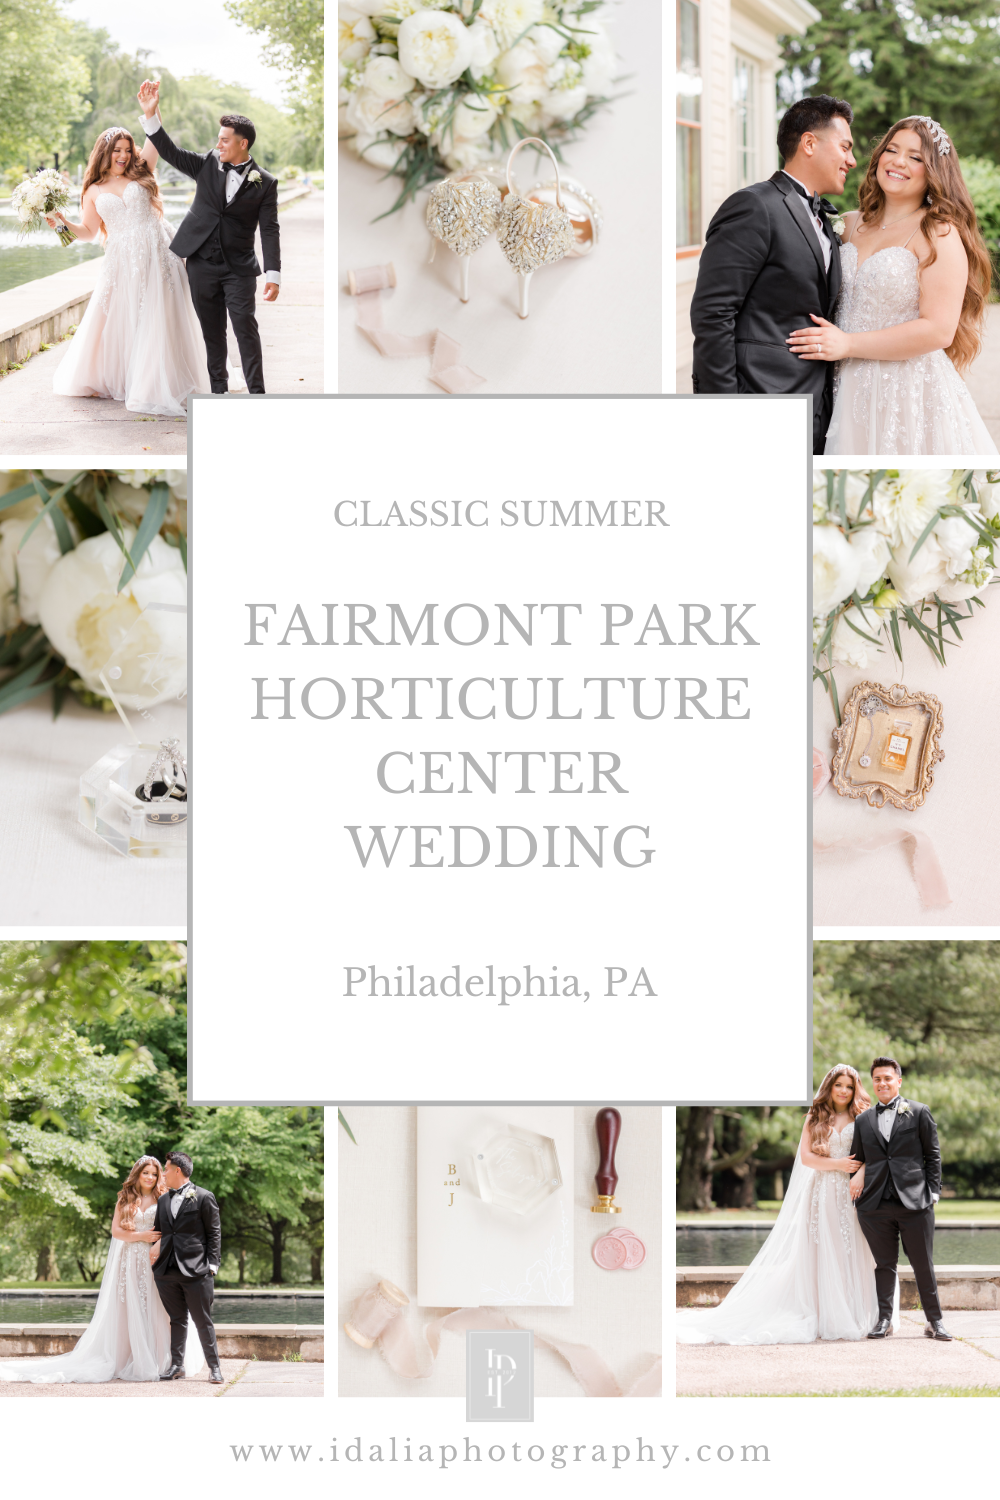 Fairmont Park Horticulture Center wedding featuring a greenhouse ceremony photographed by NJ wedding photographer Idalia Photography